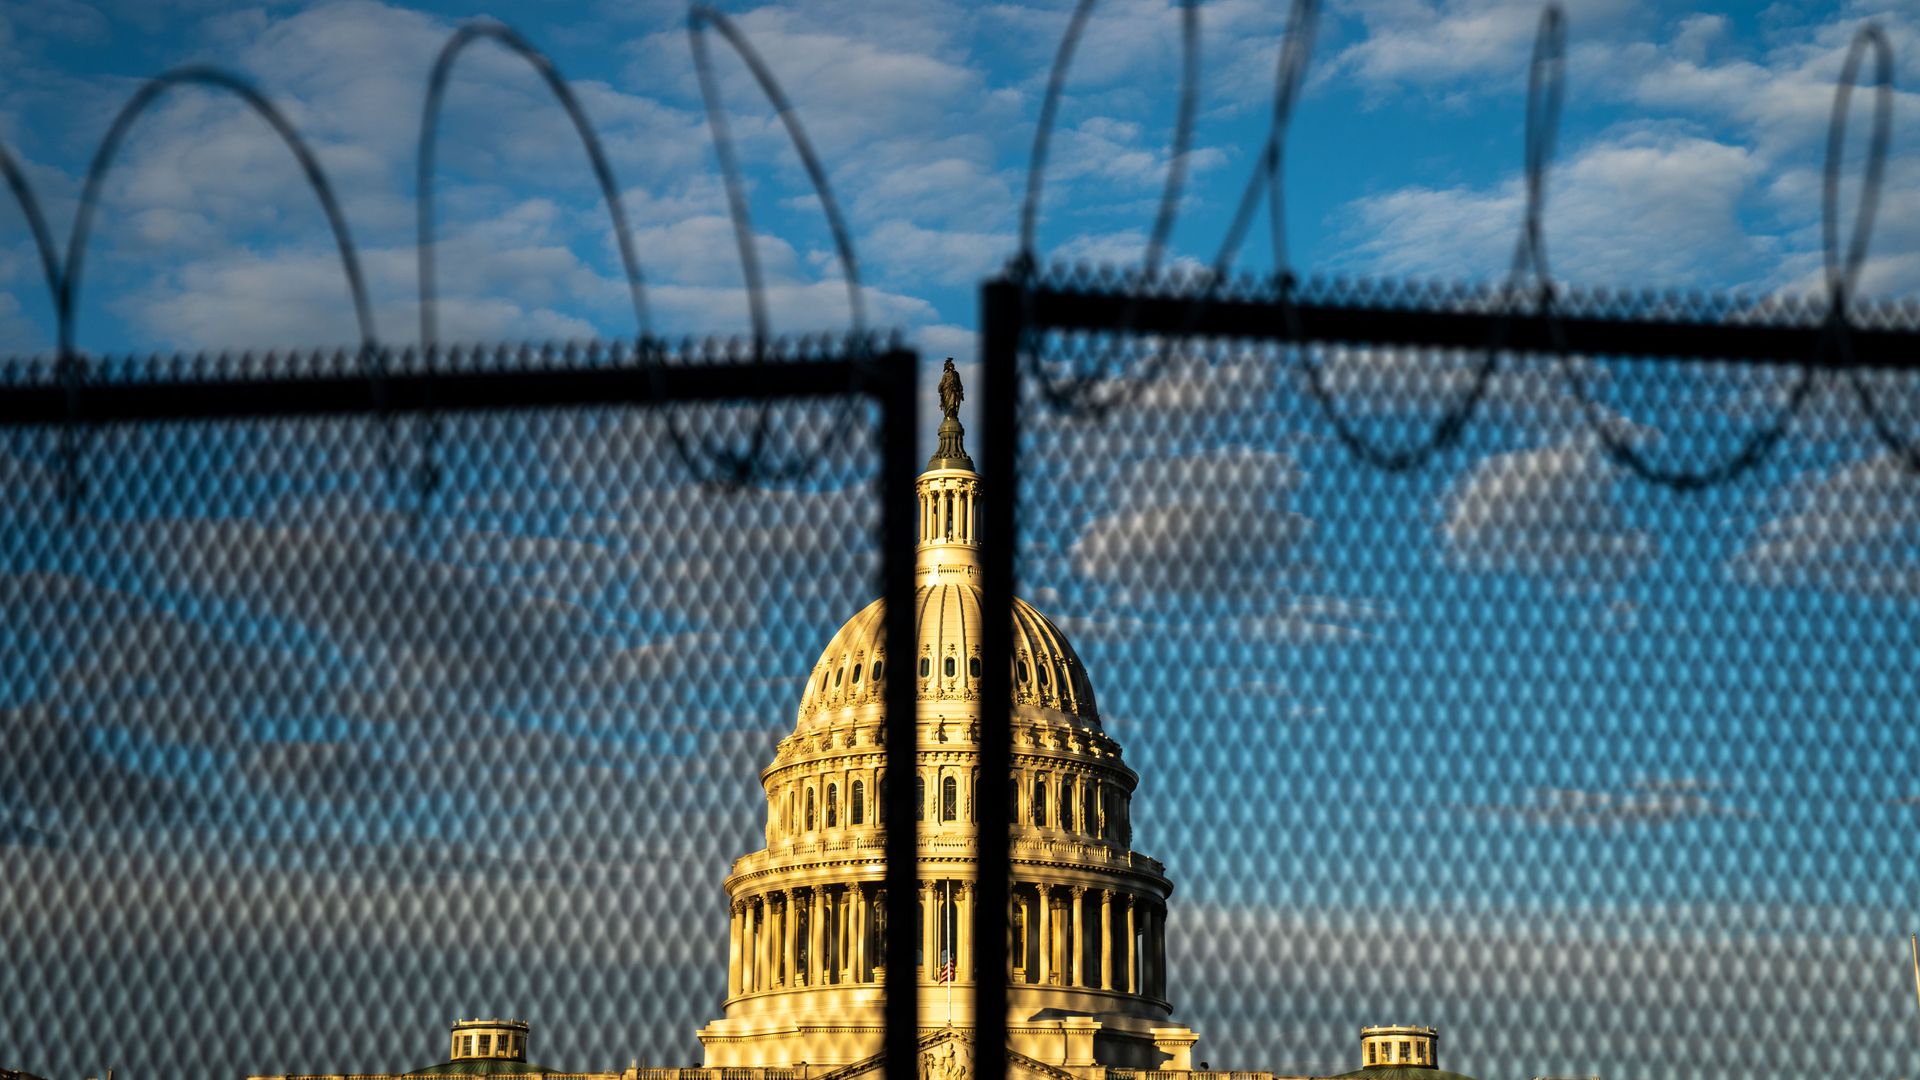 The US Capitol behind a fence.